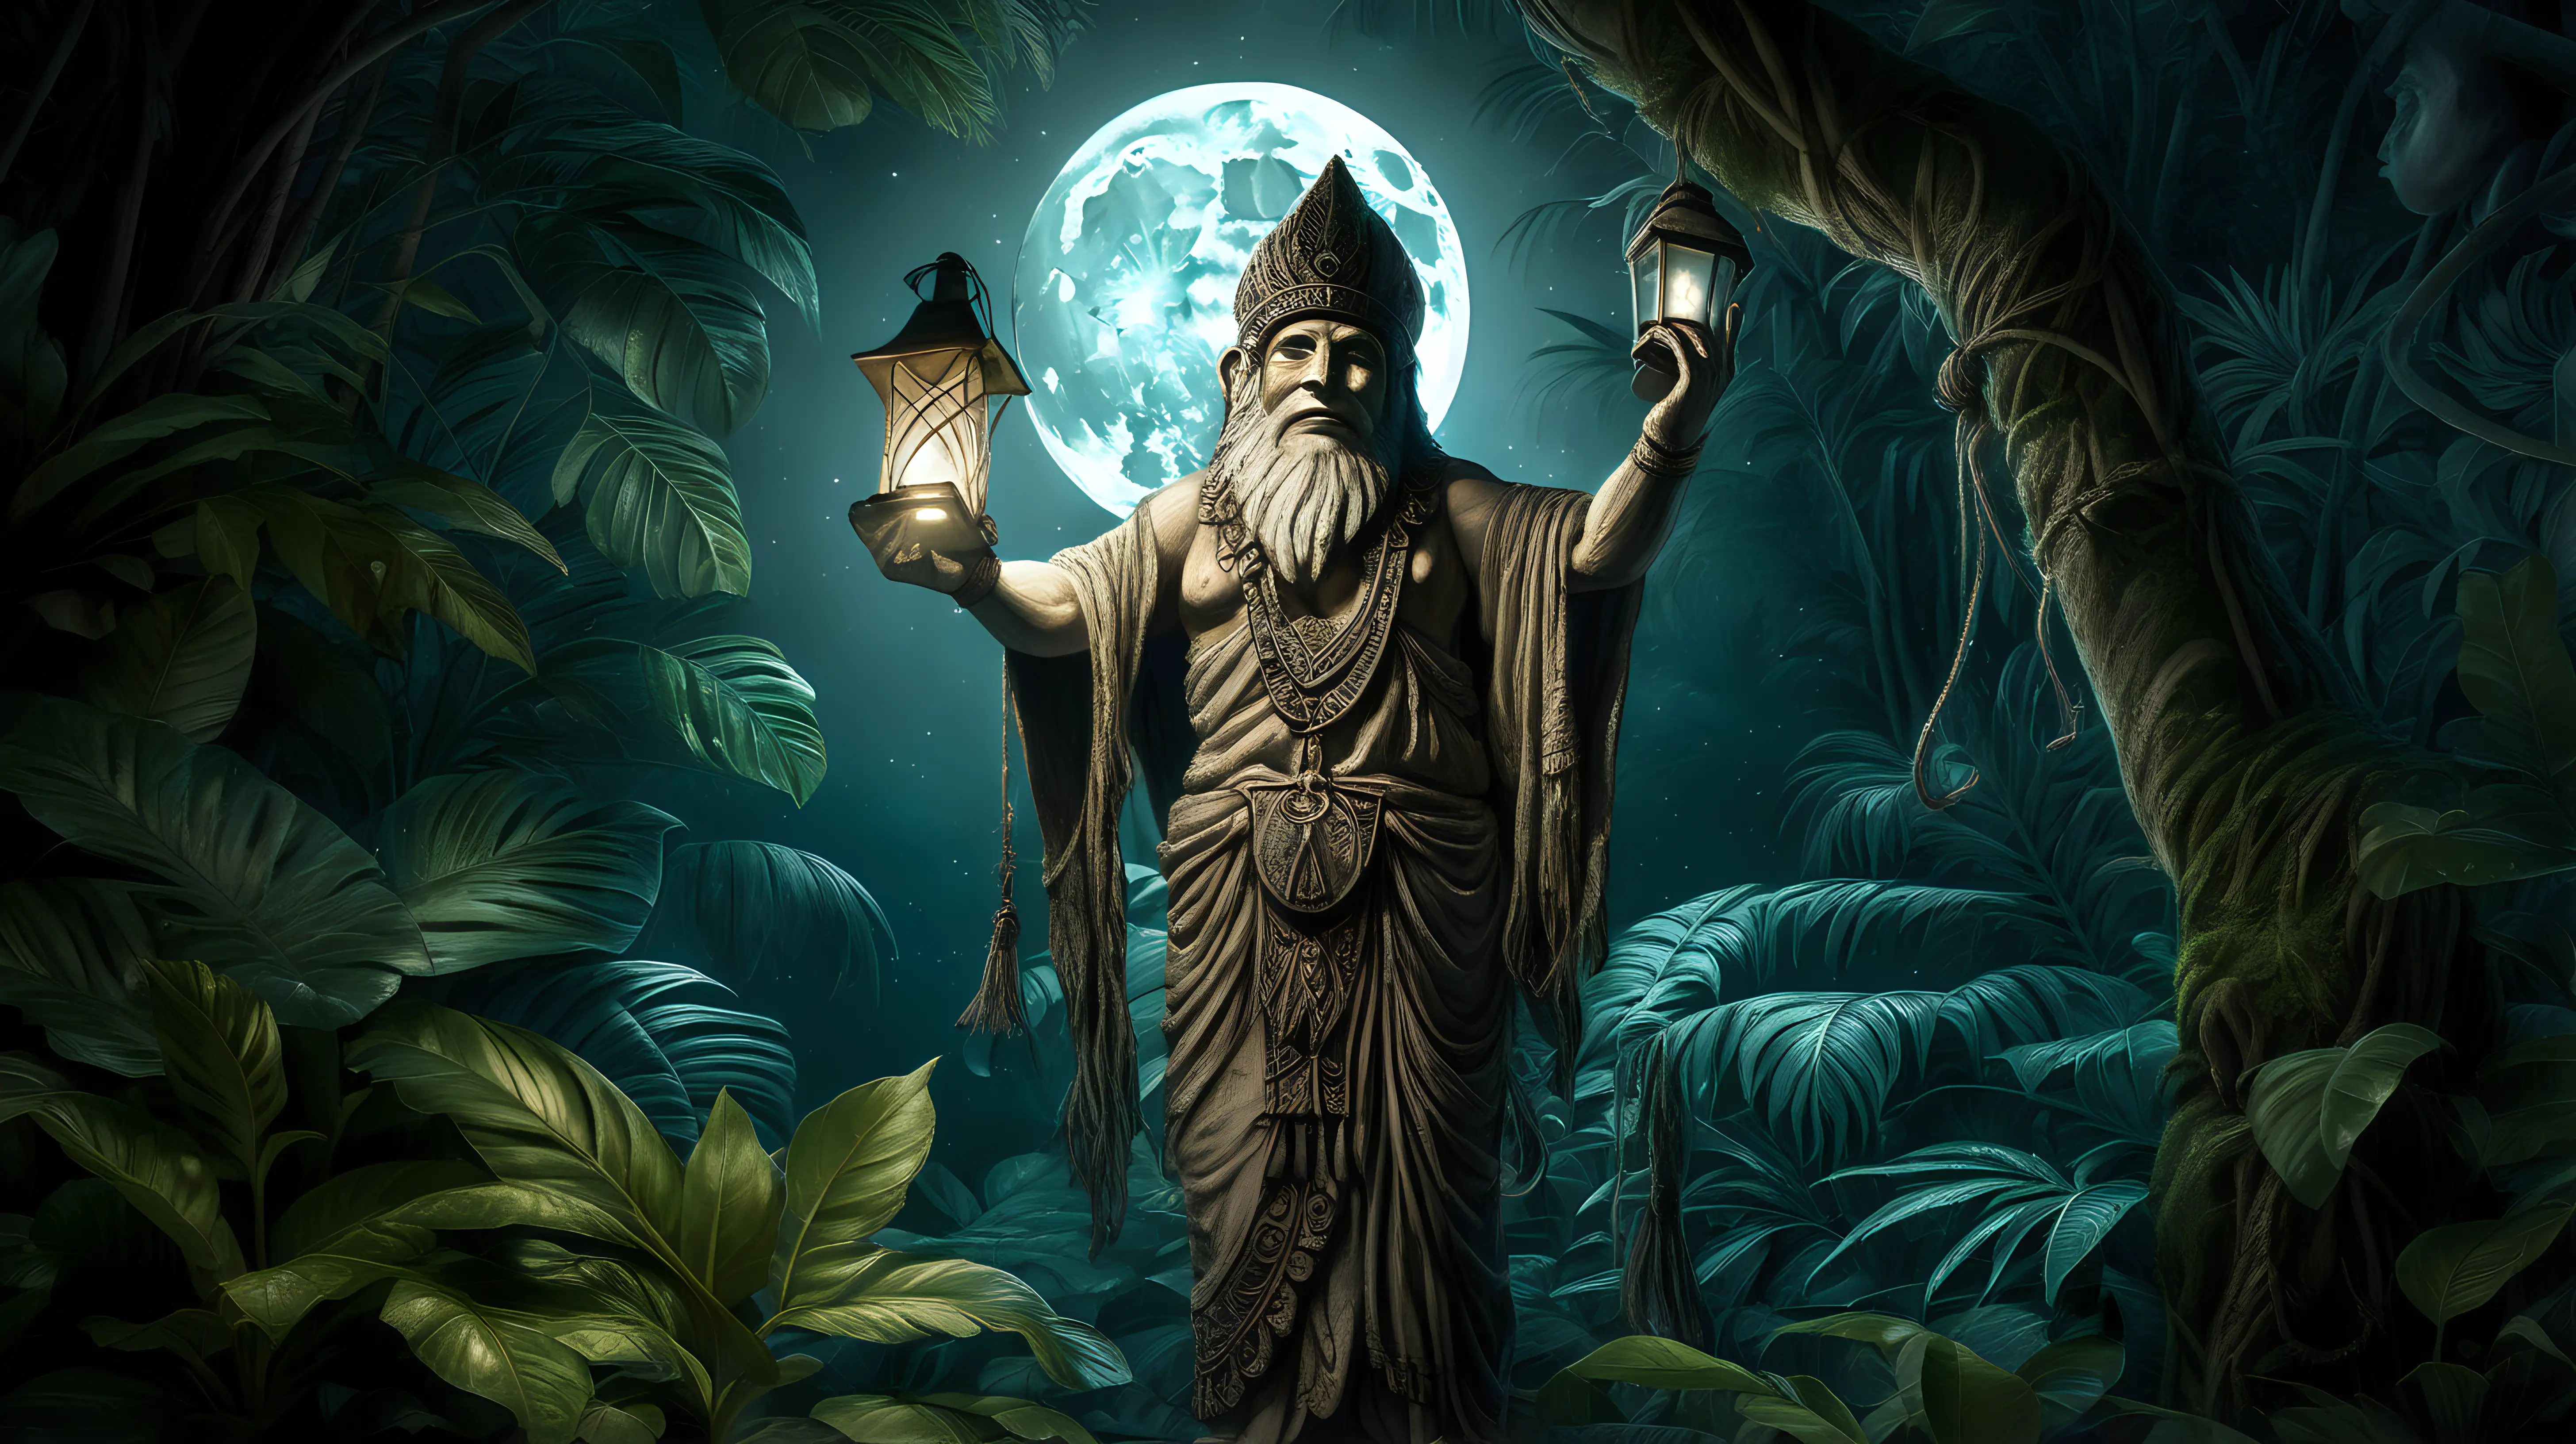 A mysterious, ancient figure holding a lantern aloft in a moonlit jungle, revealing the intricate details of his weathered face and the luminescent foliage that seems to come alive in the darkness.